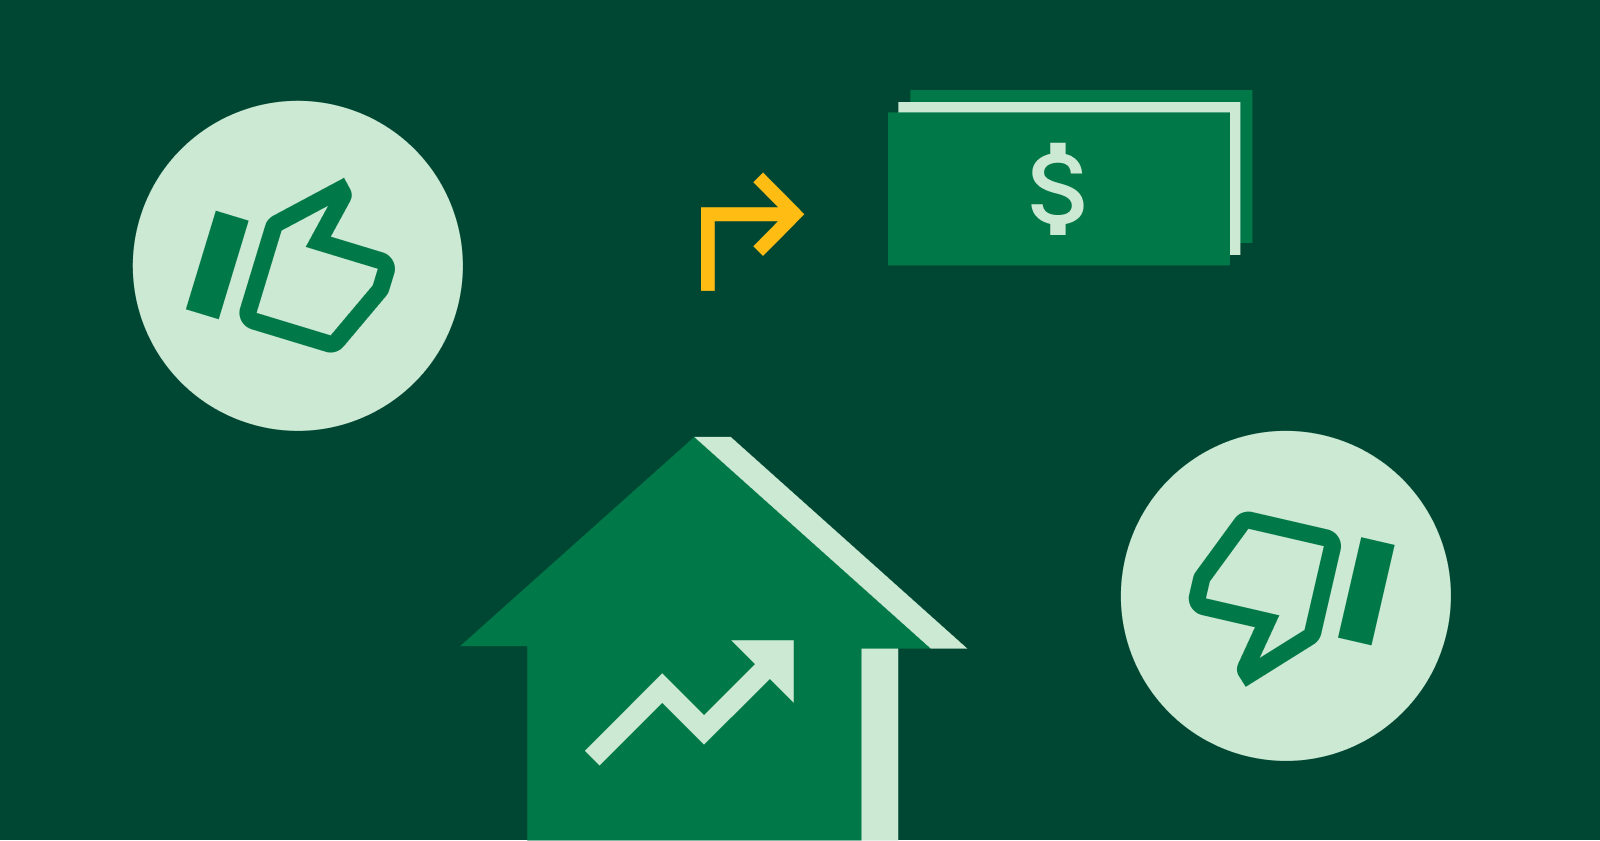 Pros and Cons of Refinancing - Green Image with a Thumbs Up, Thumbs Down, Dollar Bill and a House Icons